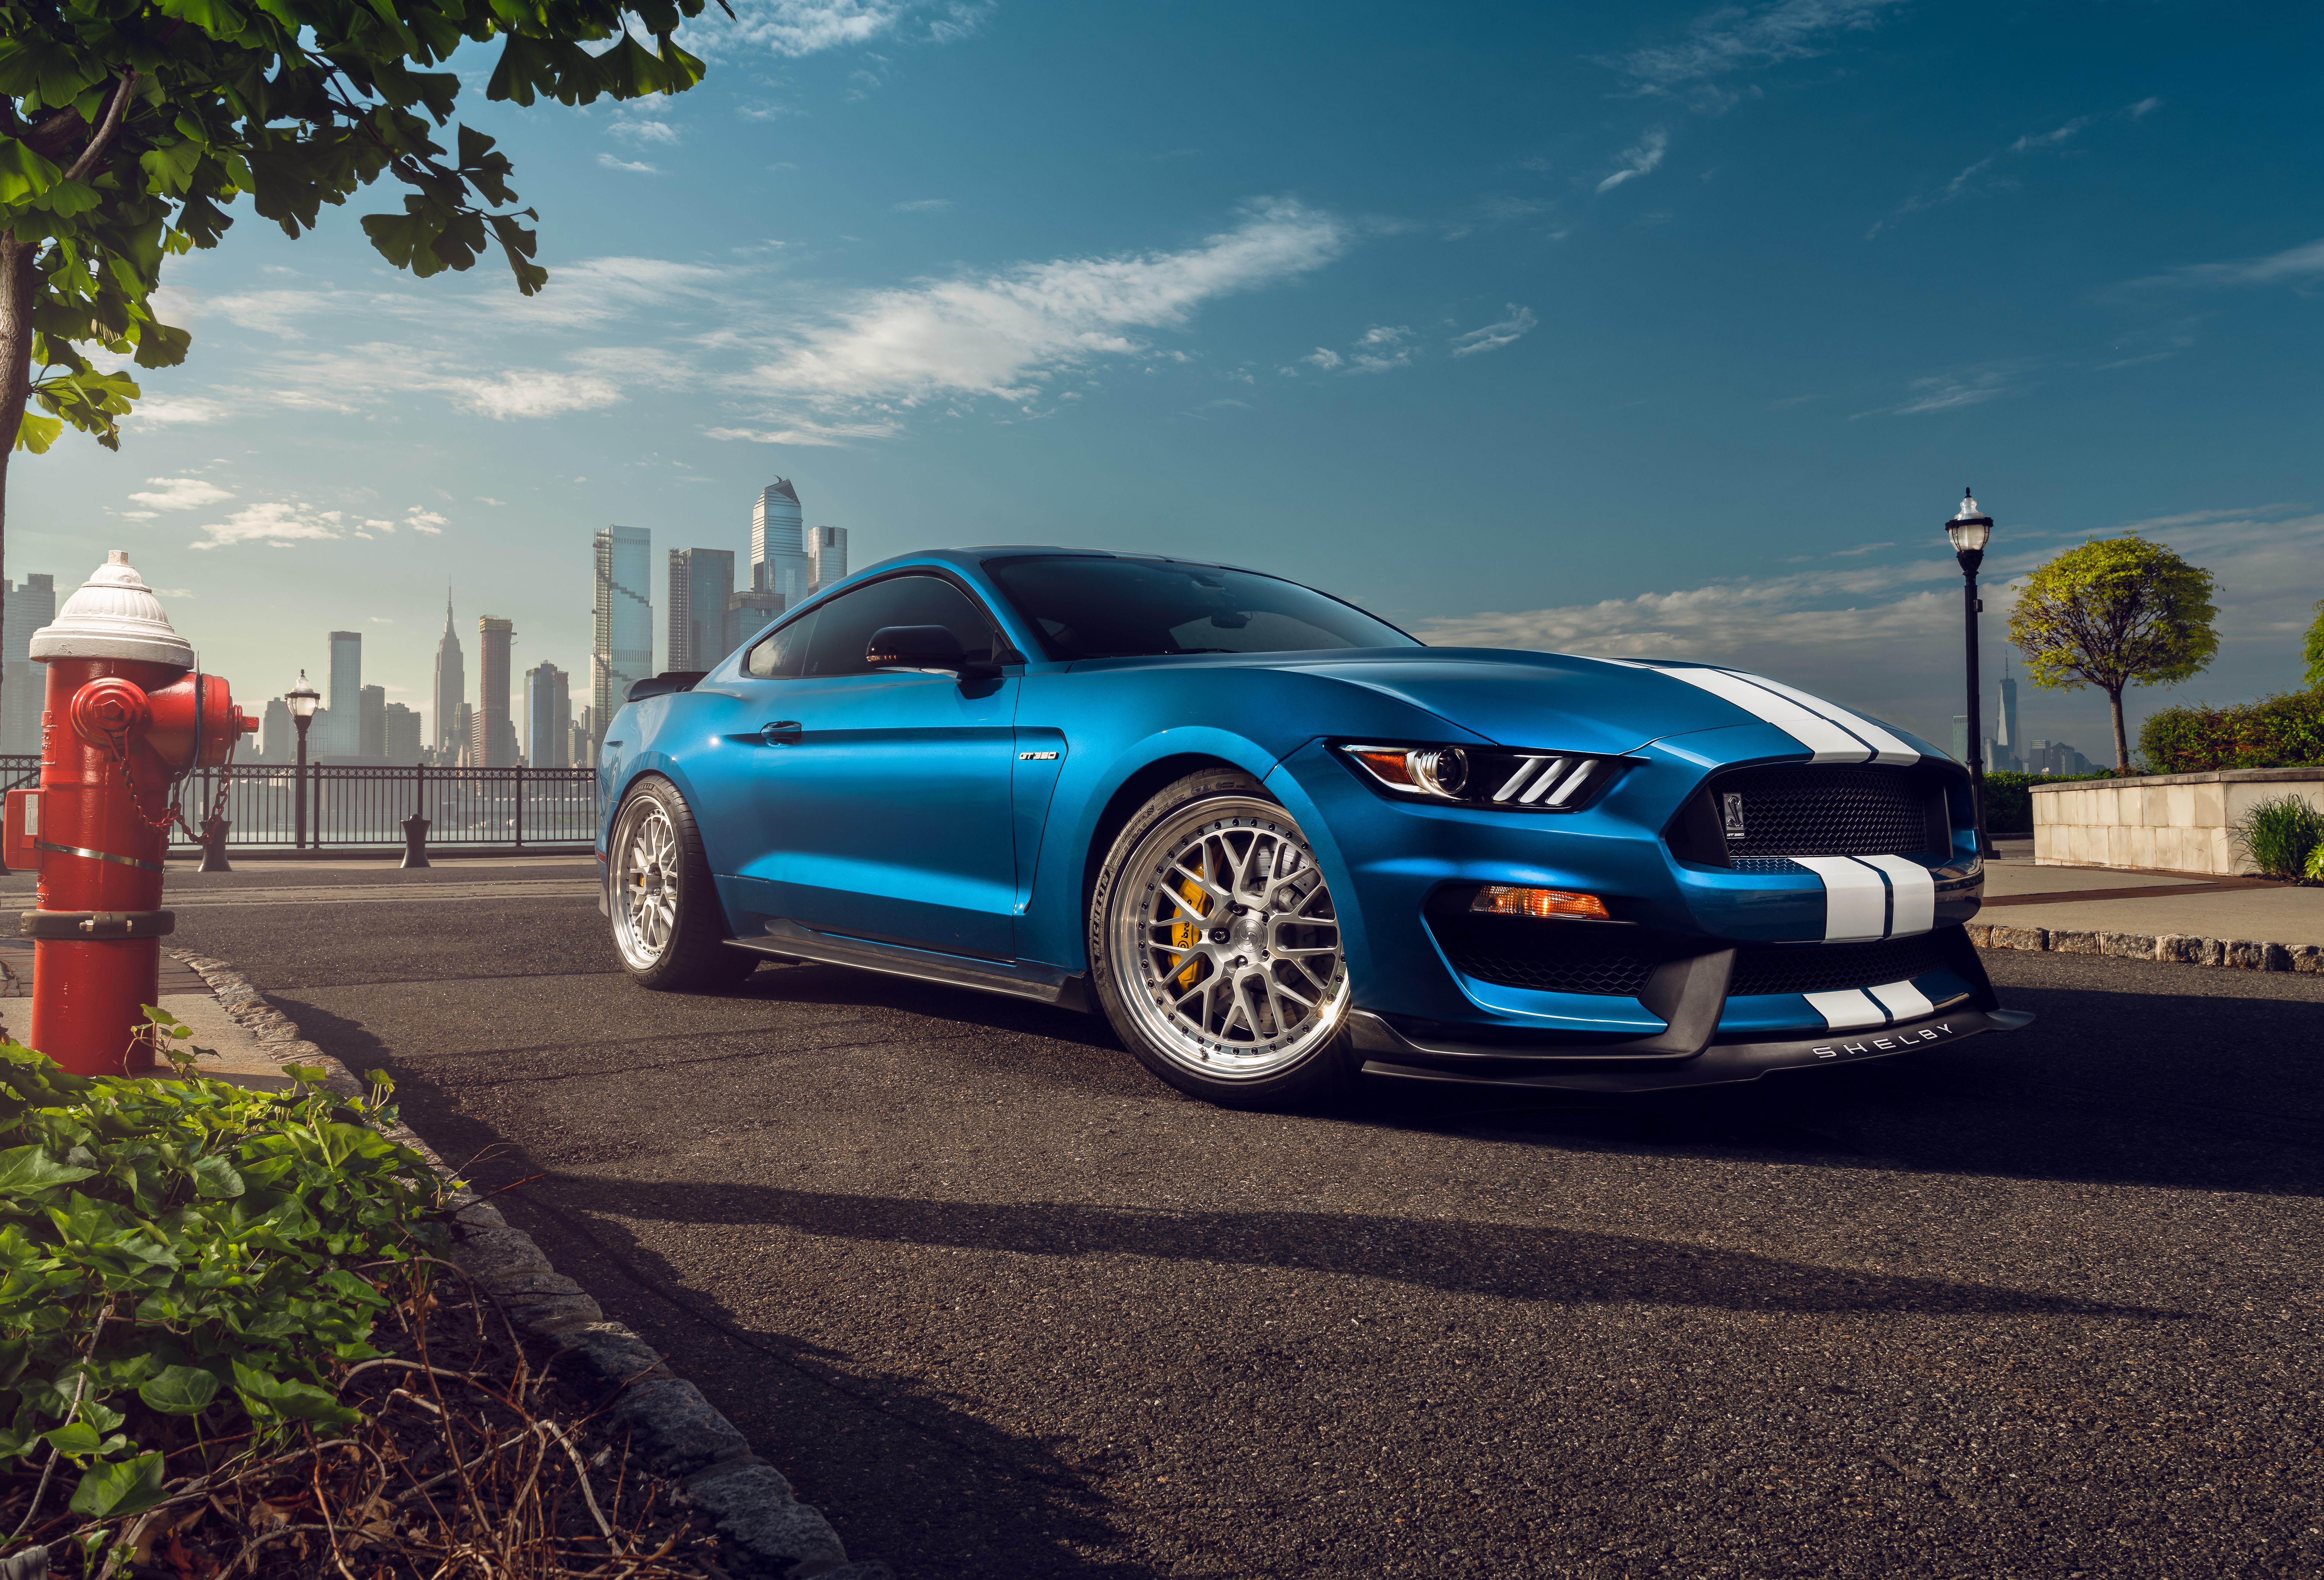 HD wallpaper, Ford Mustang Shelby Gt350, 8K, Muscle Sports Cars, 5K